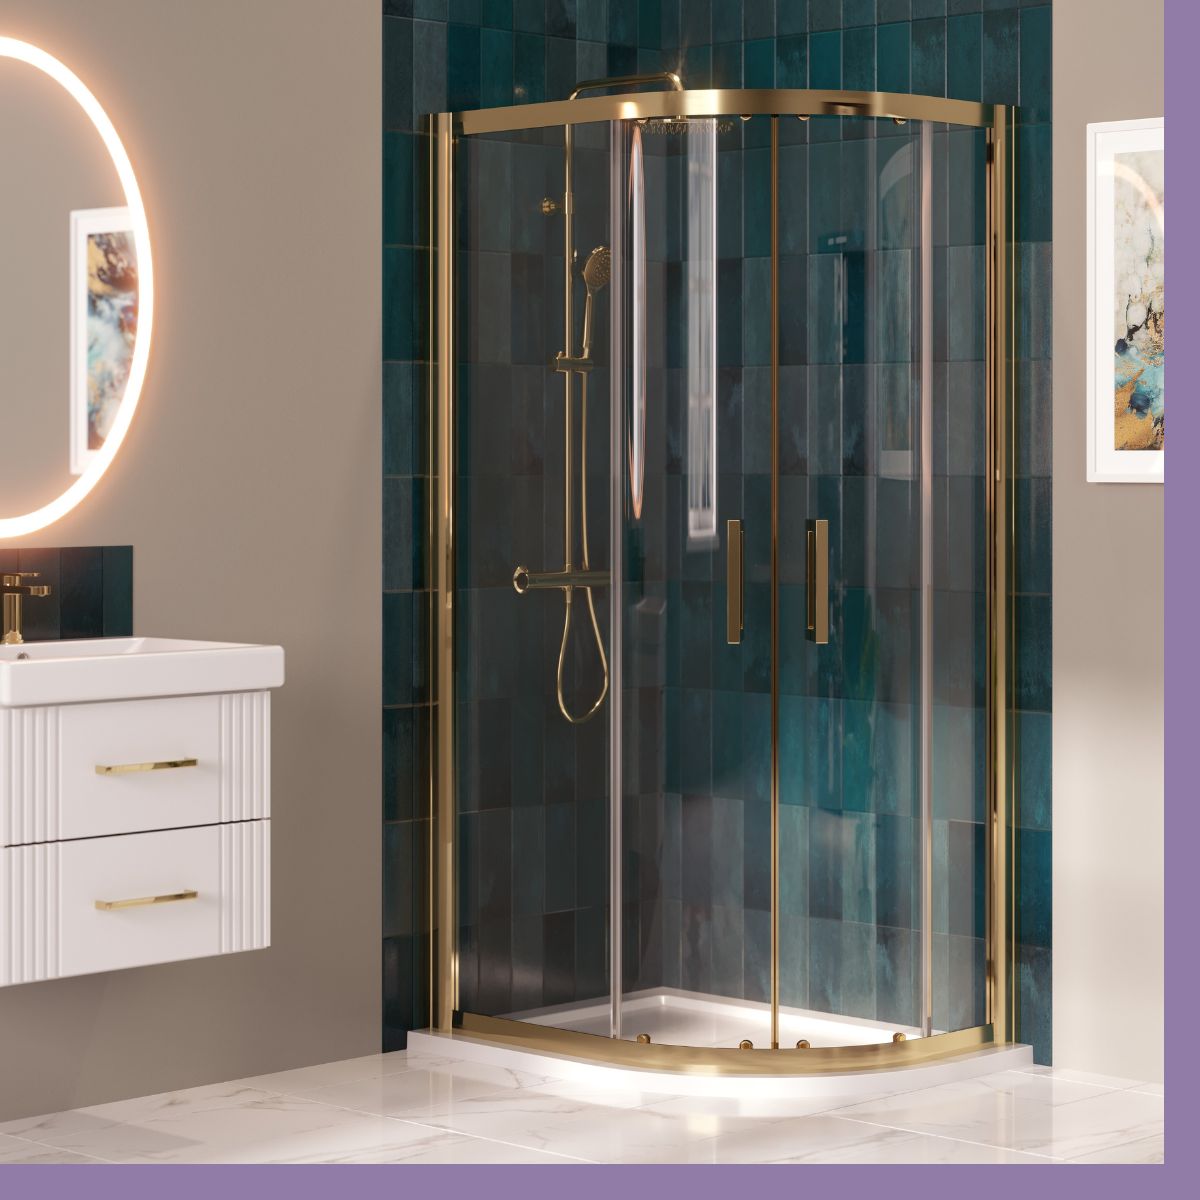 You really can't beat jumping in the shower after a long day in the office! And it doesn't get any smoother than the double doors of the Coral Brush brass enclosures. #CoralShowerEnclosure #BrushedBrassFinish #Shower #BathroomRenovation #BathroomInspiration #ShowerEnclosureGoals